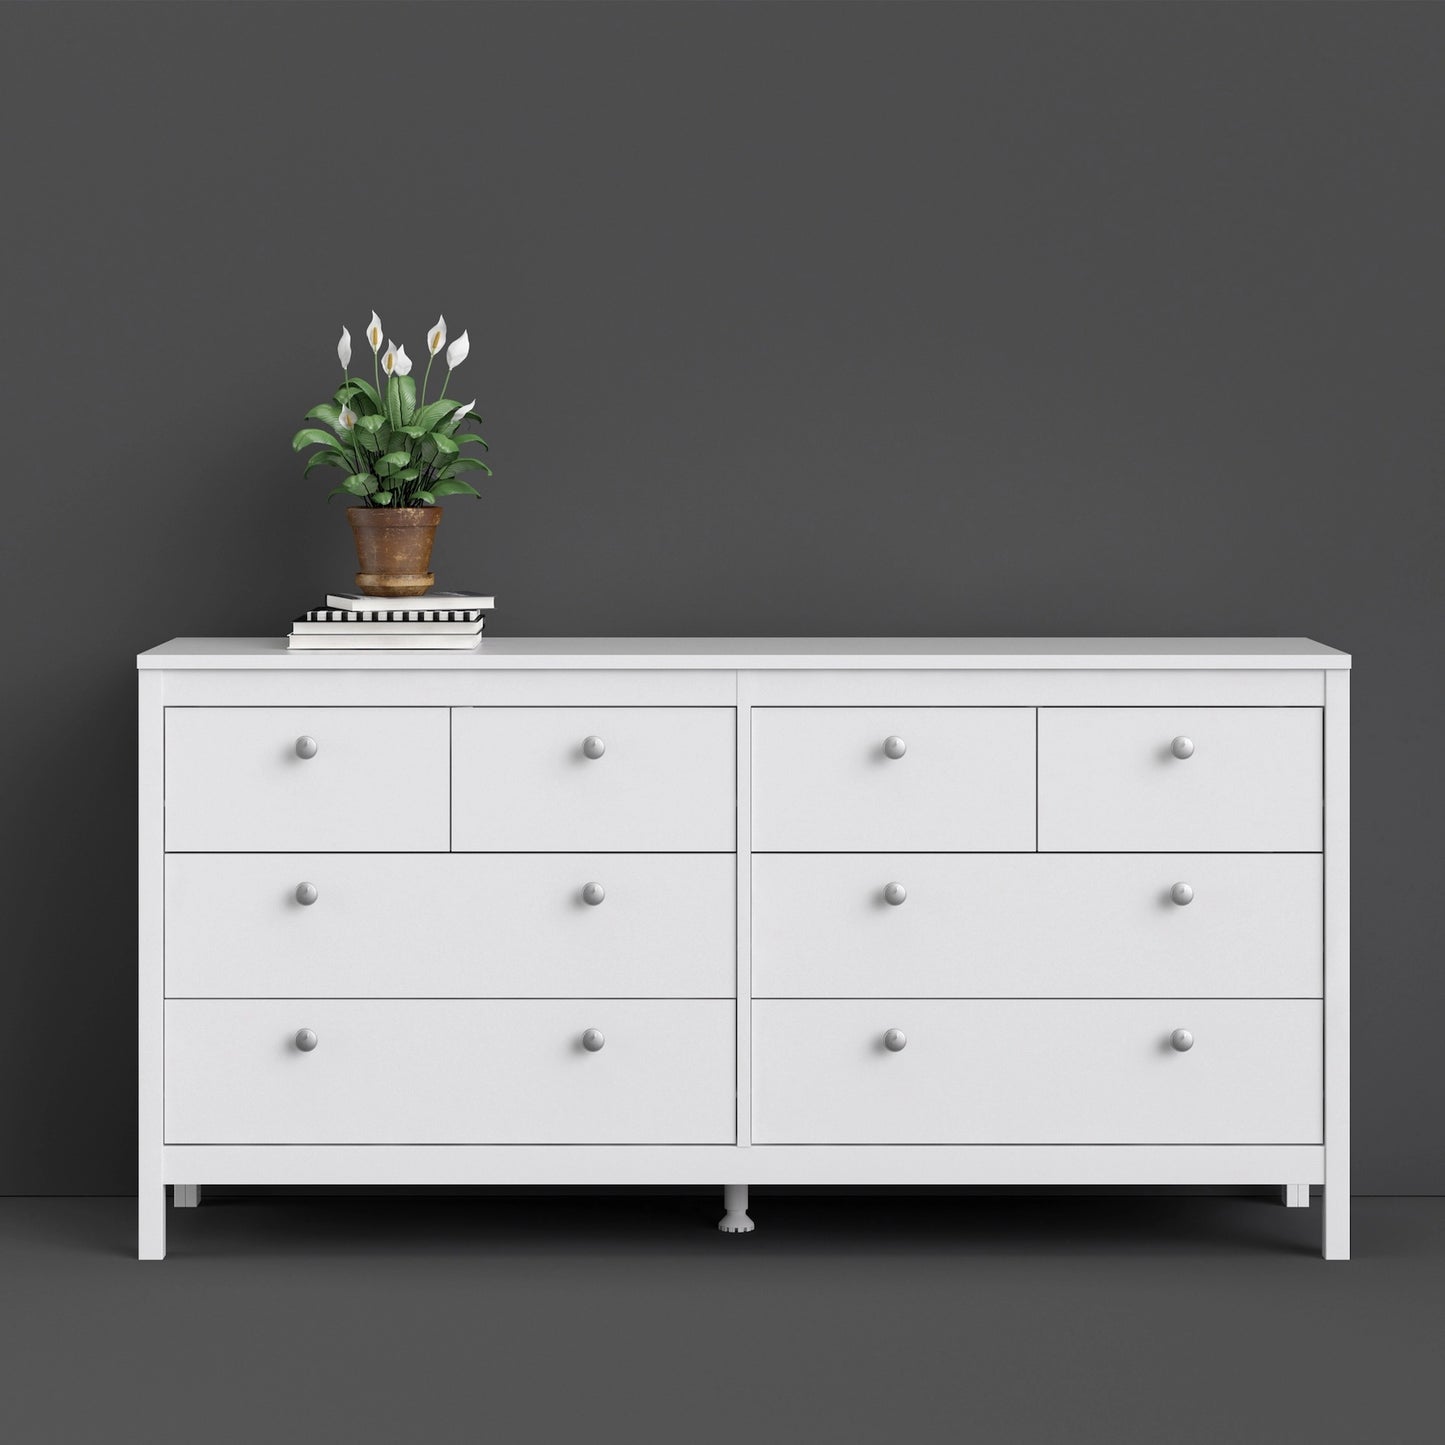 Furniture To Go Madrid Double Dresser 4+4 Drawers in White